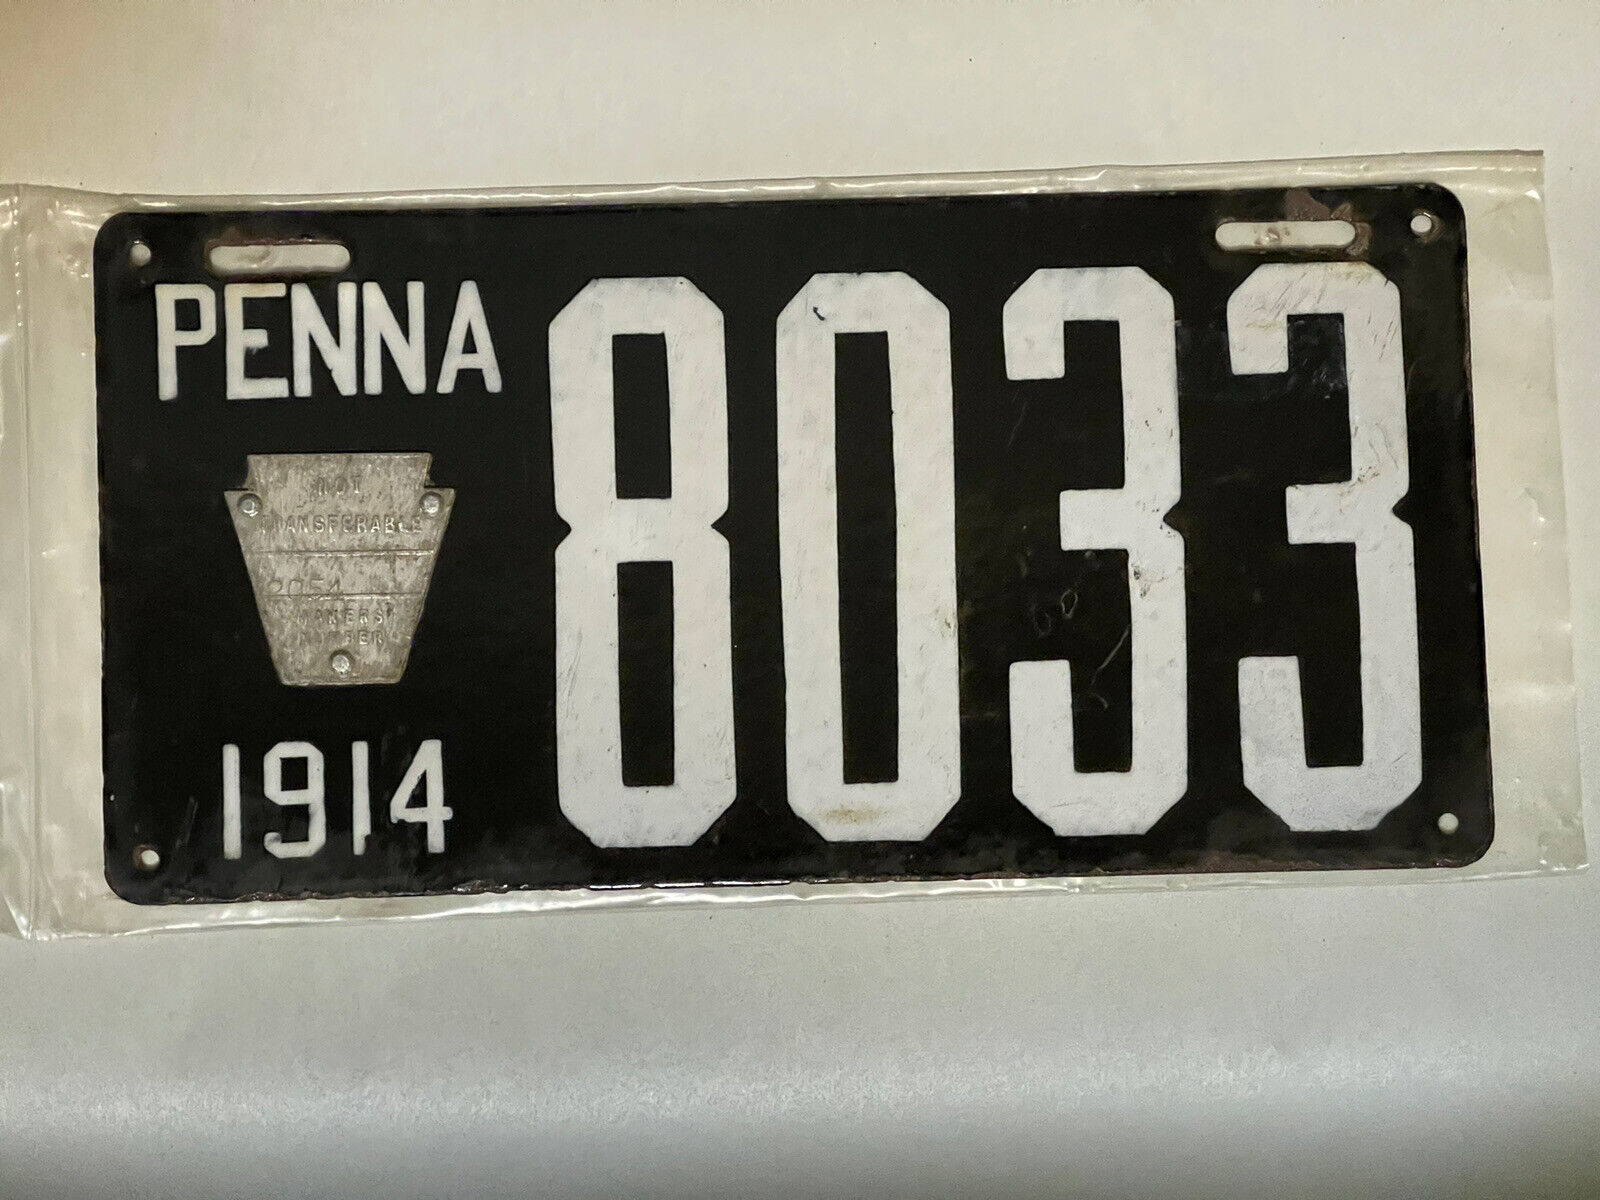 1914 Pennsylvania Black Porcelain 4 digit License Plate 8033 With Tag